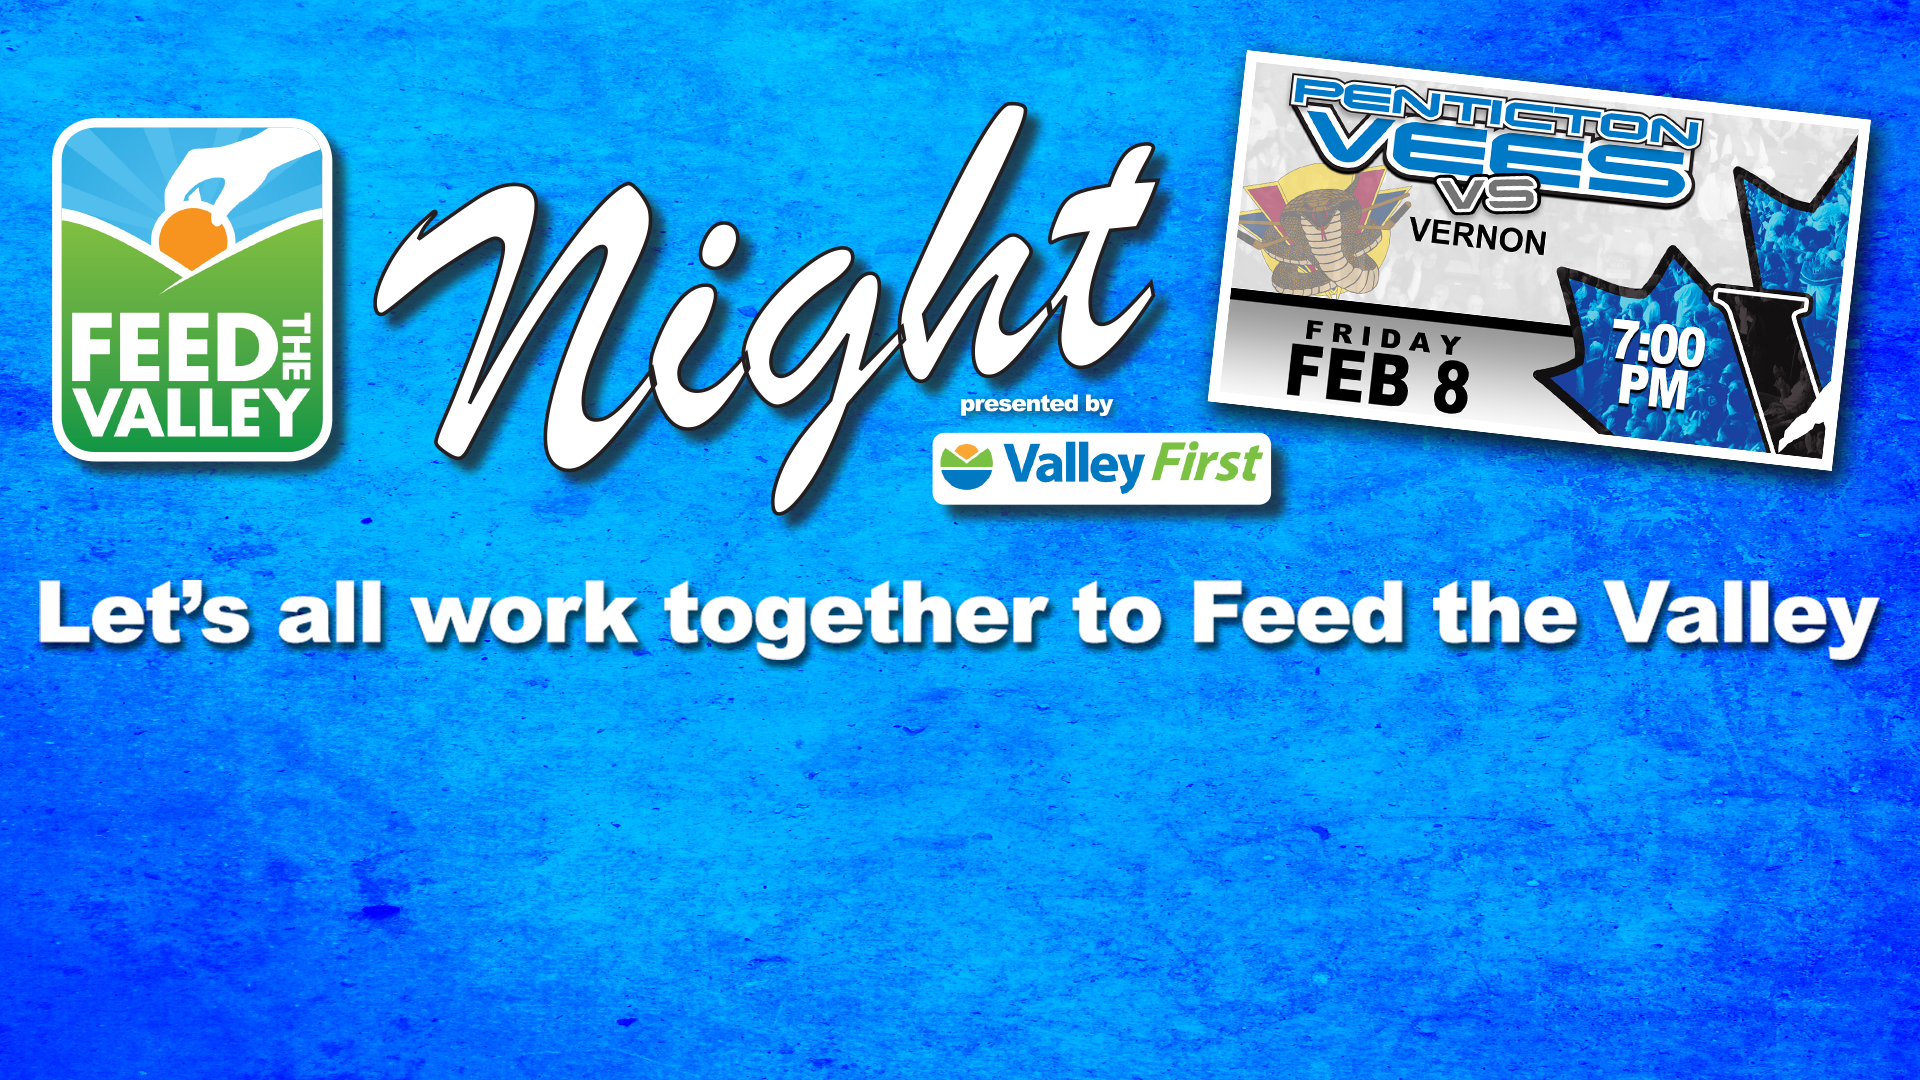 Annual Feed the Valley Night presented by Valley First